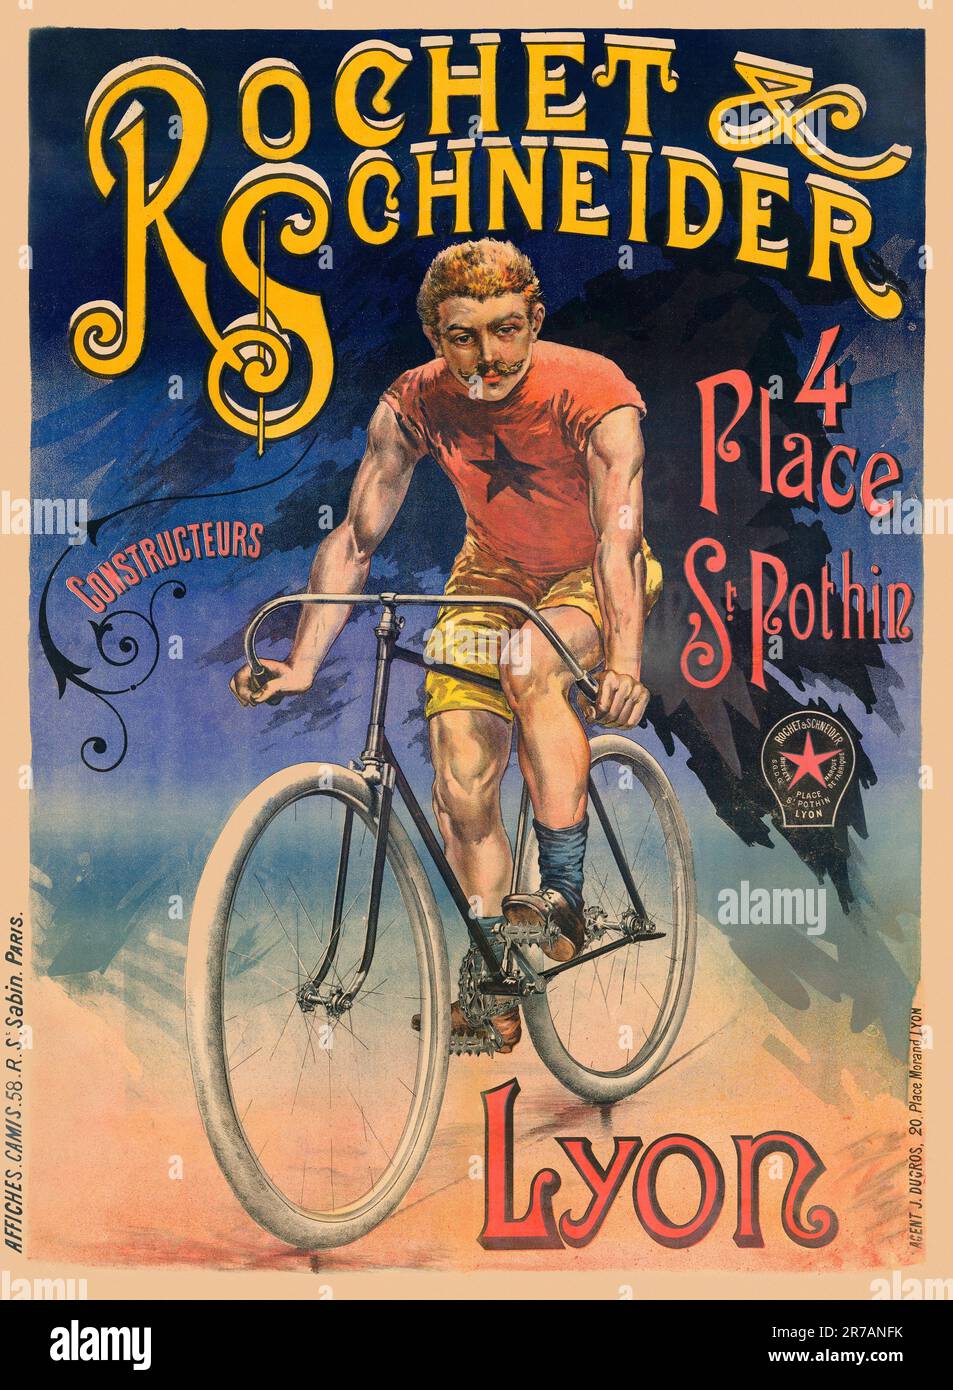 Rochet & Schneider. Constructeurs. 4 place St Pothin, Lyon. Artist unknown. Poster published in 1890 in France. Stock Photo